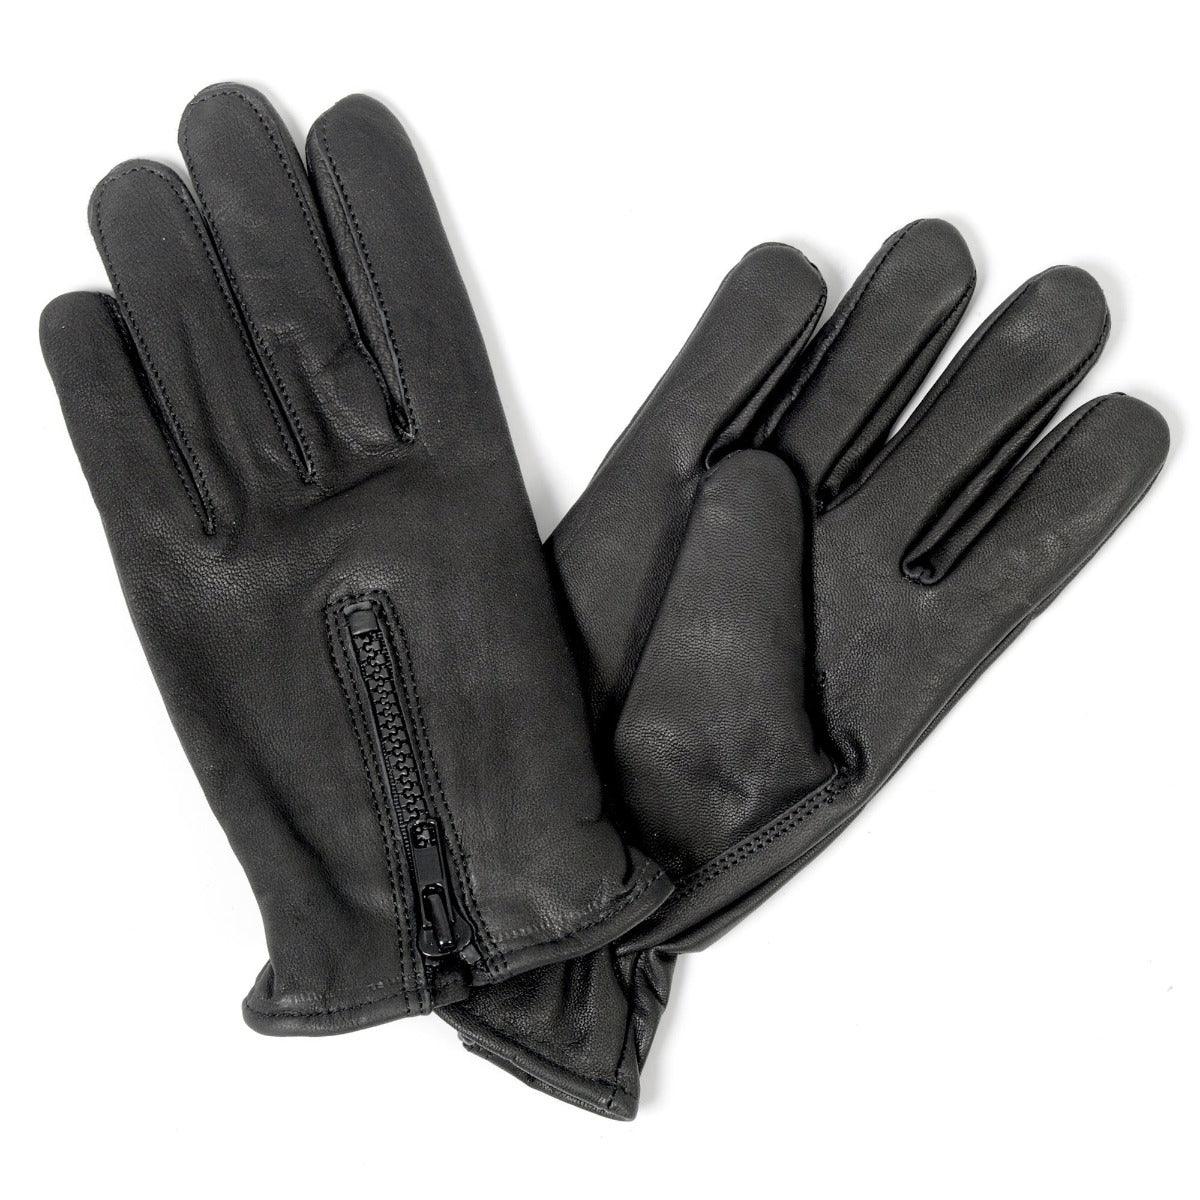 Hot Leathers Fleece Lined Leather Glove - American Legend Rider